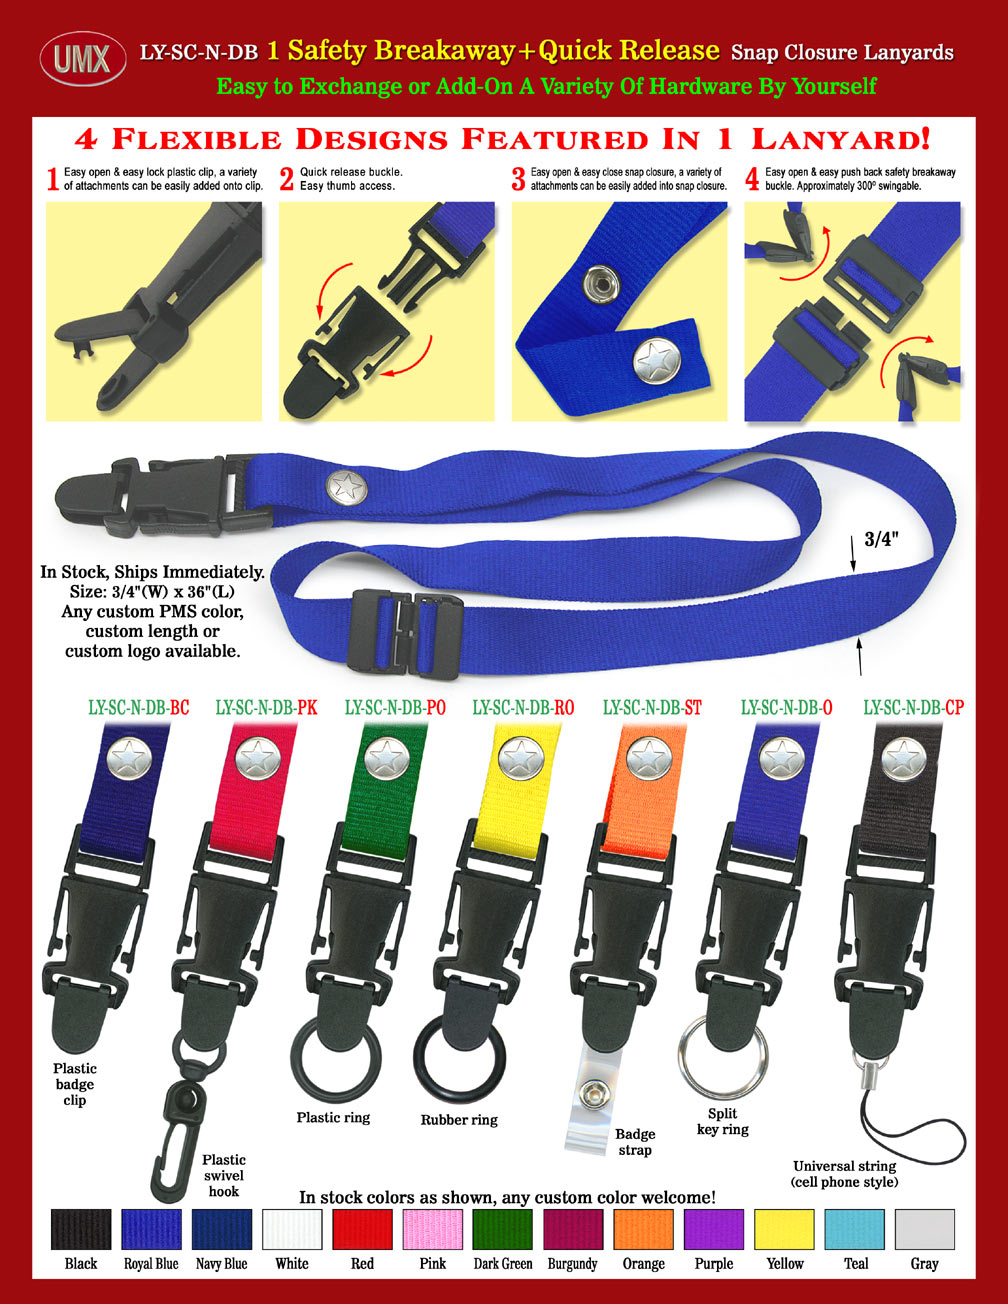 Quick Release Snap-On Safety Lanyards - With One Safety Breakaway On The Back Of Neck.